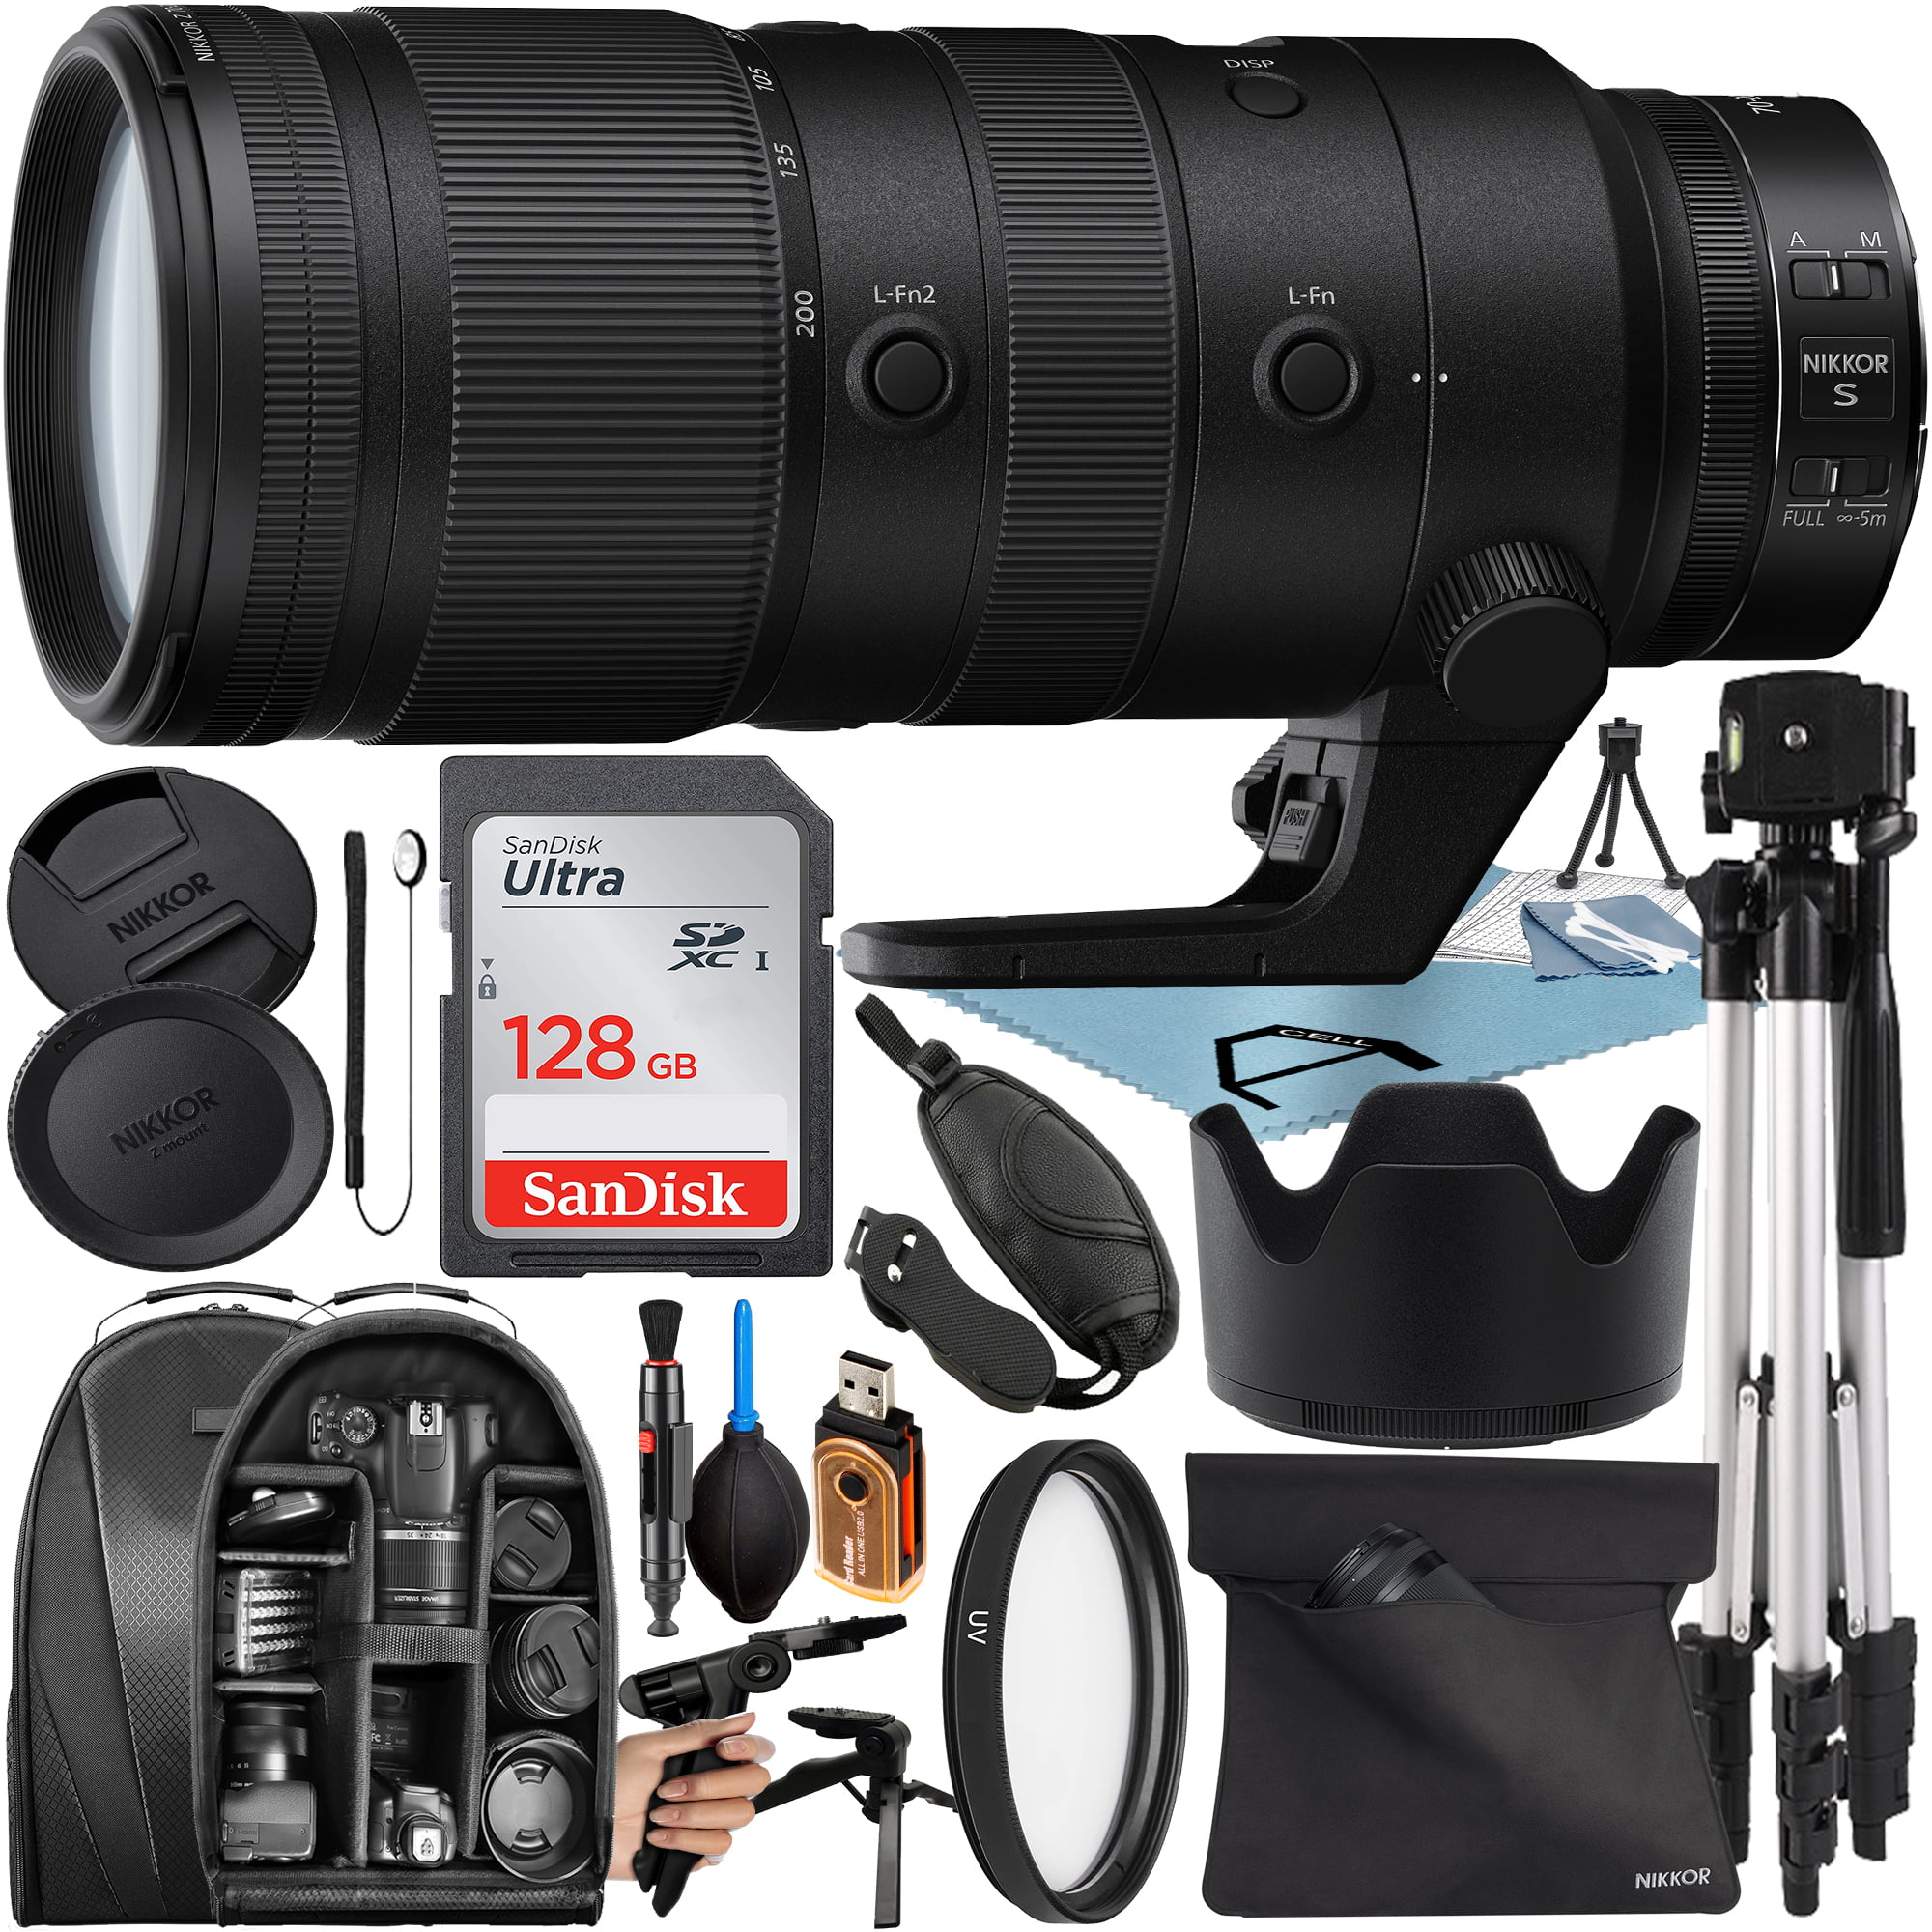 Nikon NIKKOR Z 70-200mm F/2.8 VR S Lens with 128GB SanDisk Memory Card + Tripod + Backpack + A-Cell Accessory Bundle